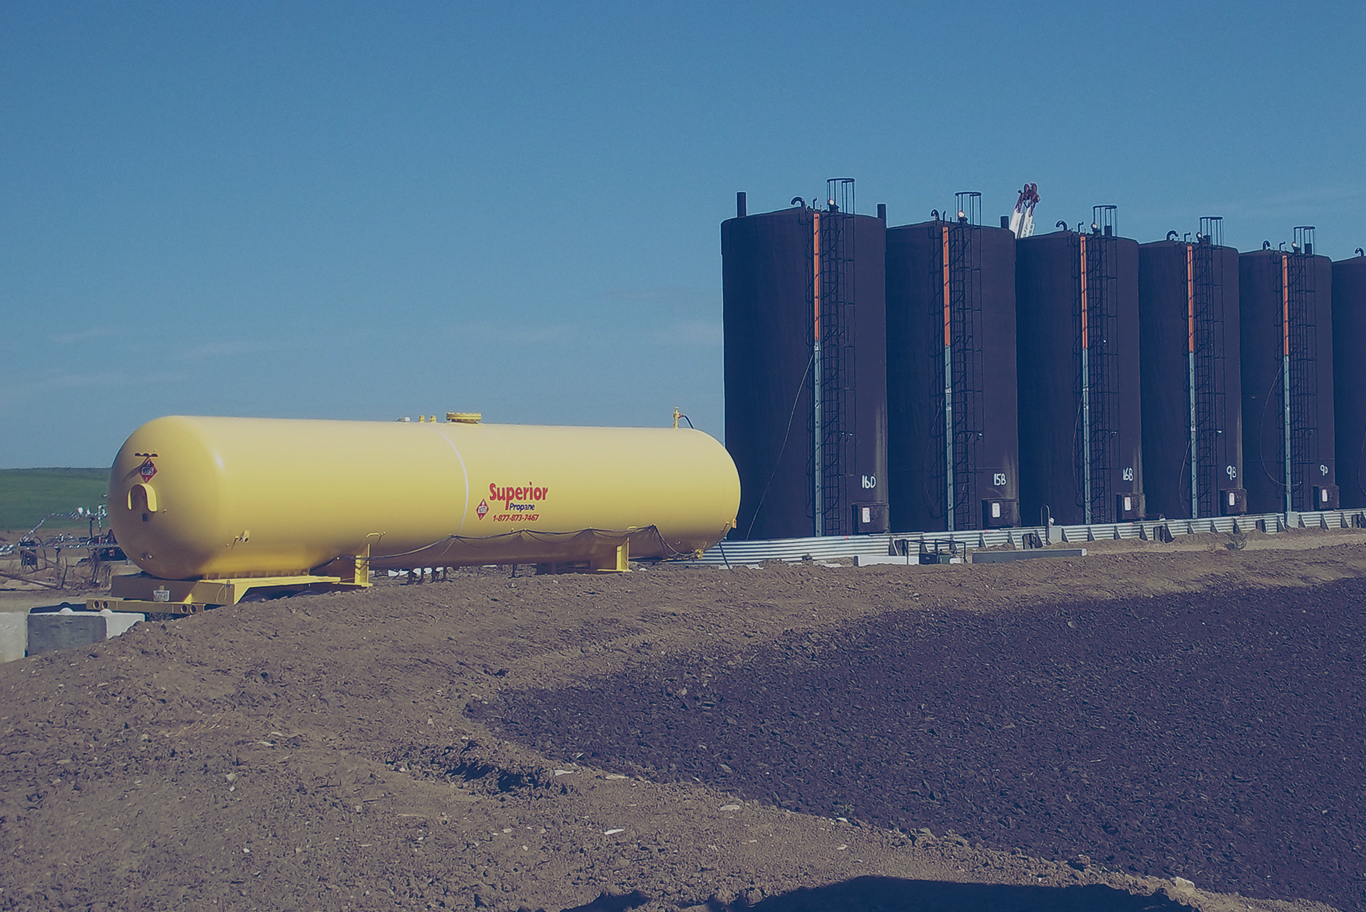 A large yellow Superior Propane tank next to several silos.